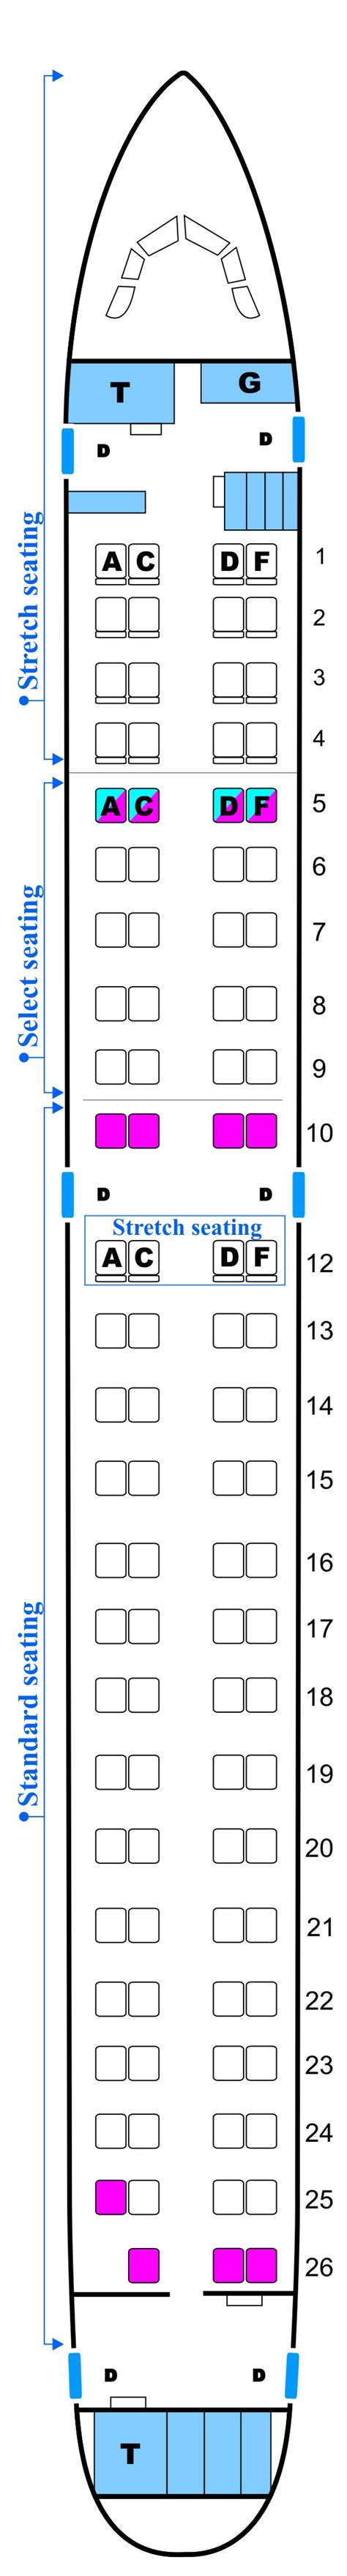 Seat Map Midwest Airlines Embraer E190 Config A Seatmaestro